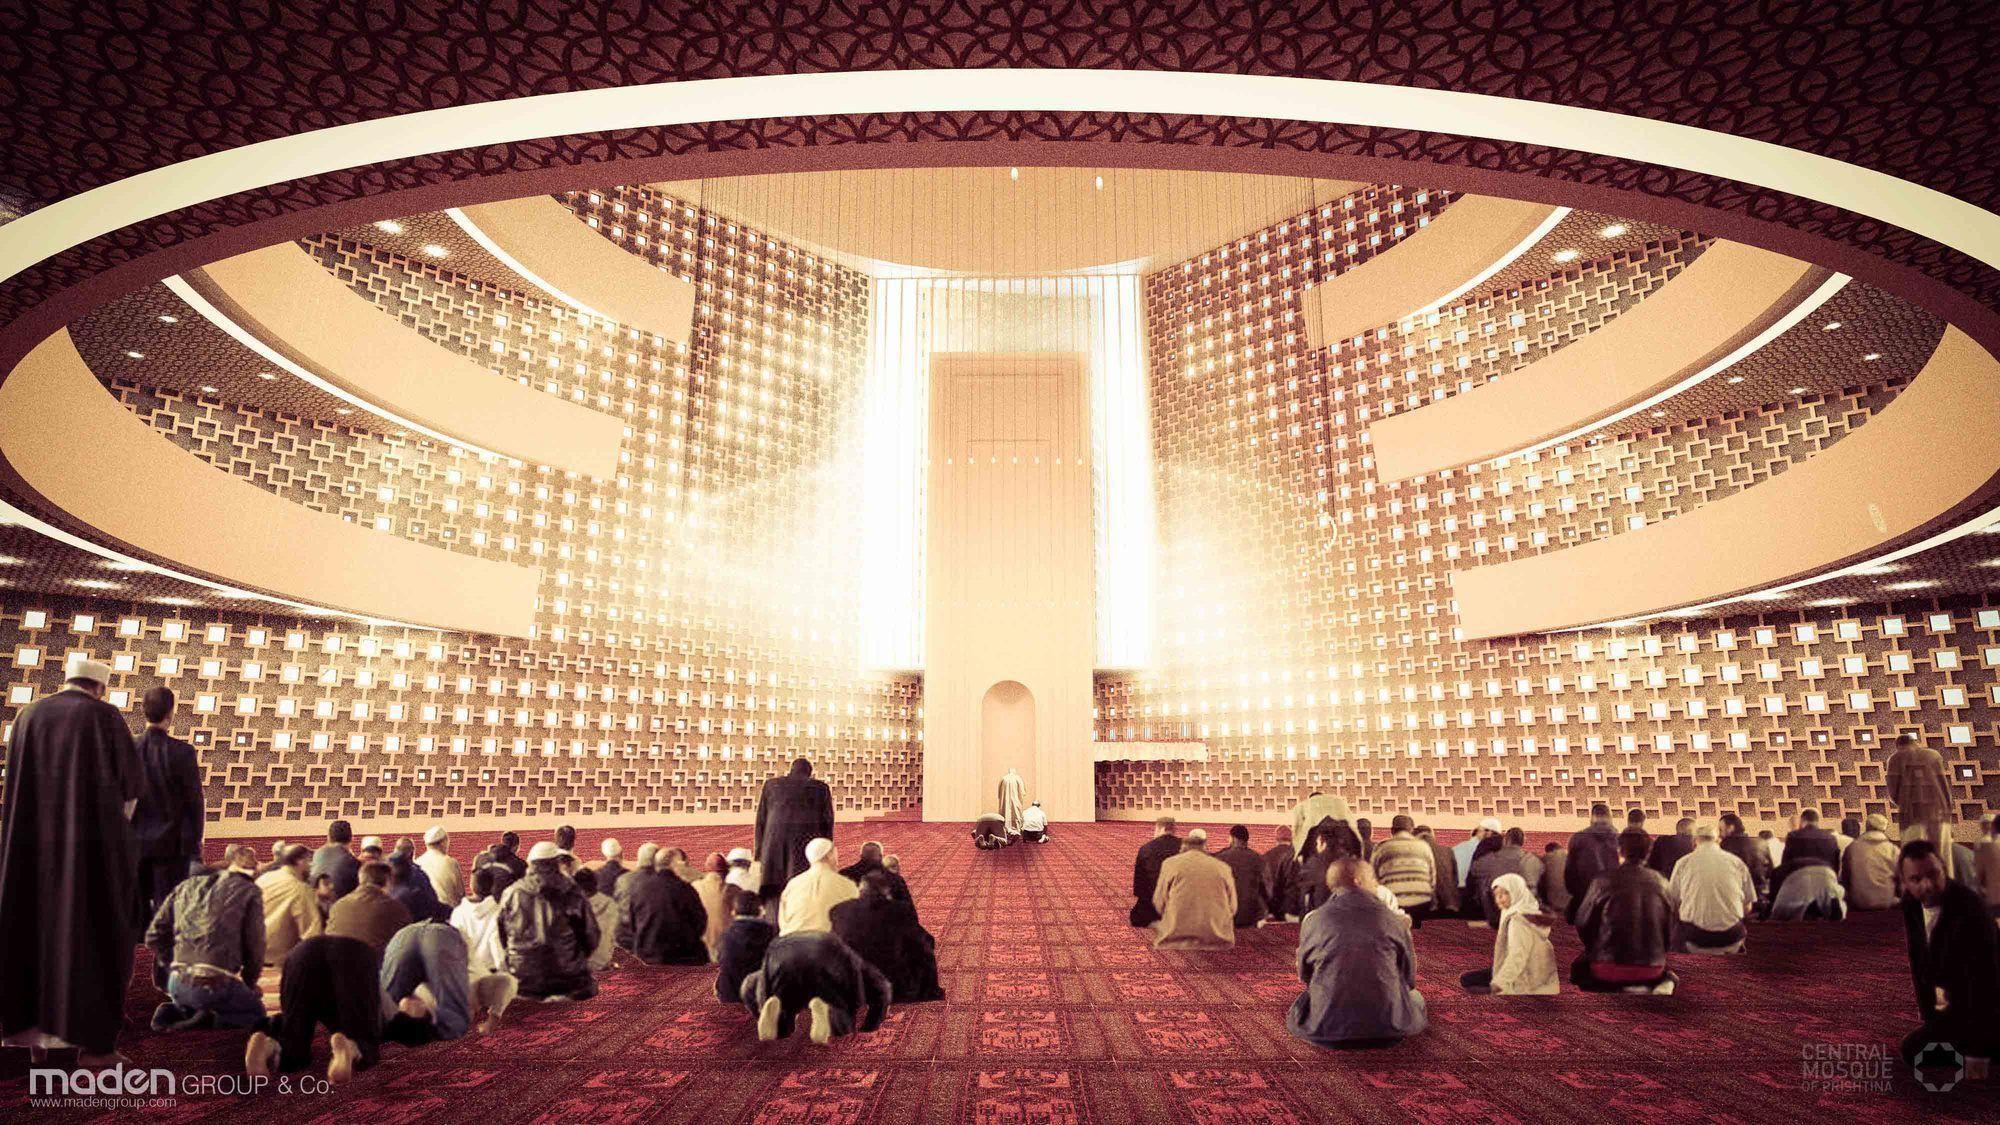 5179de1fb3fc4bc67600013a_central-mosque-of-pristina-competition-entry-maden-group_image_010-mg-cmp-render